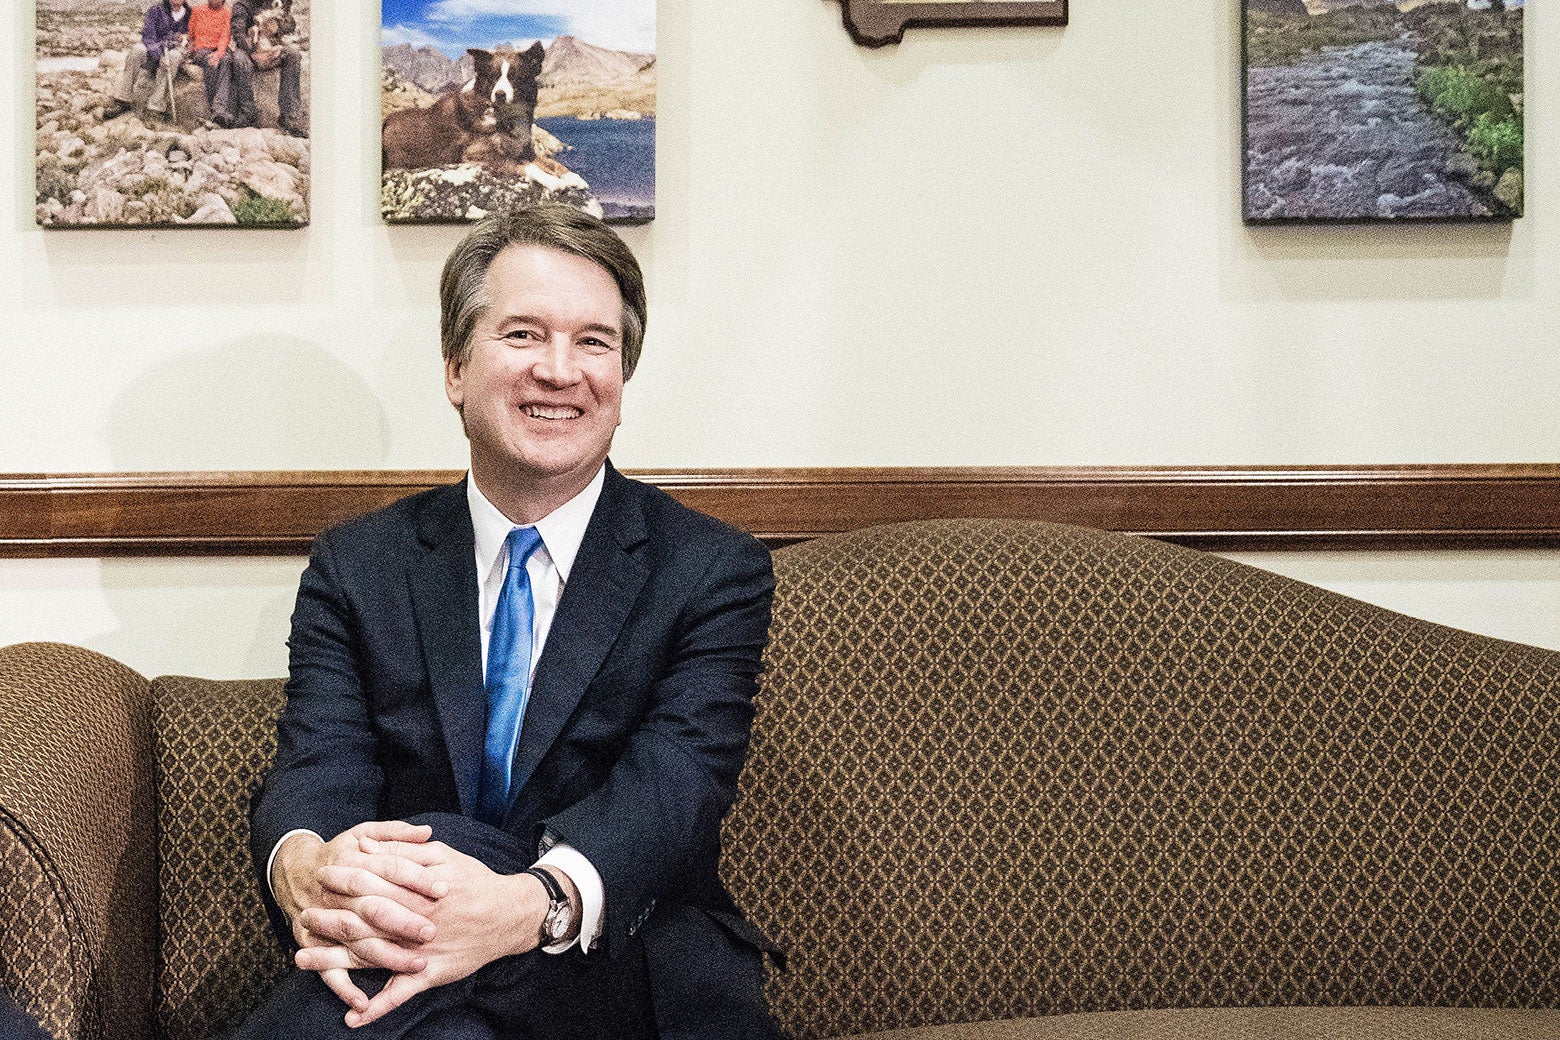 Supreme Court nominee Judge Brett Kavanaugh poses for photos as he meets with Montana Sen. Steve Daines on Capitol Hill on July 17.